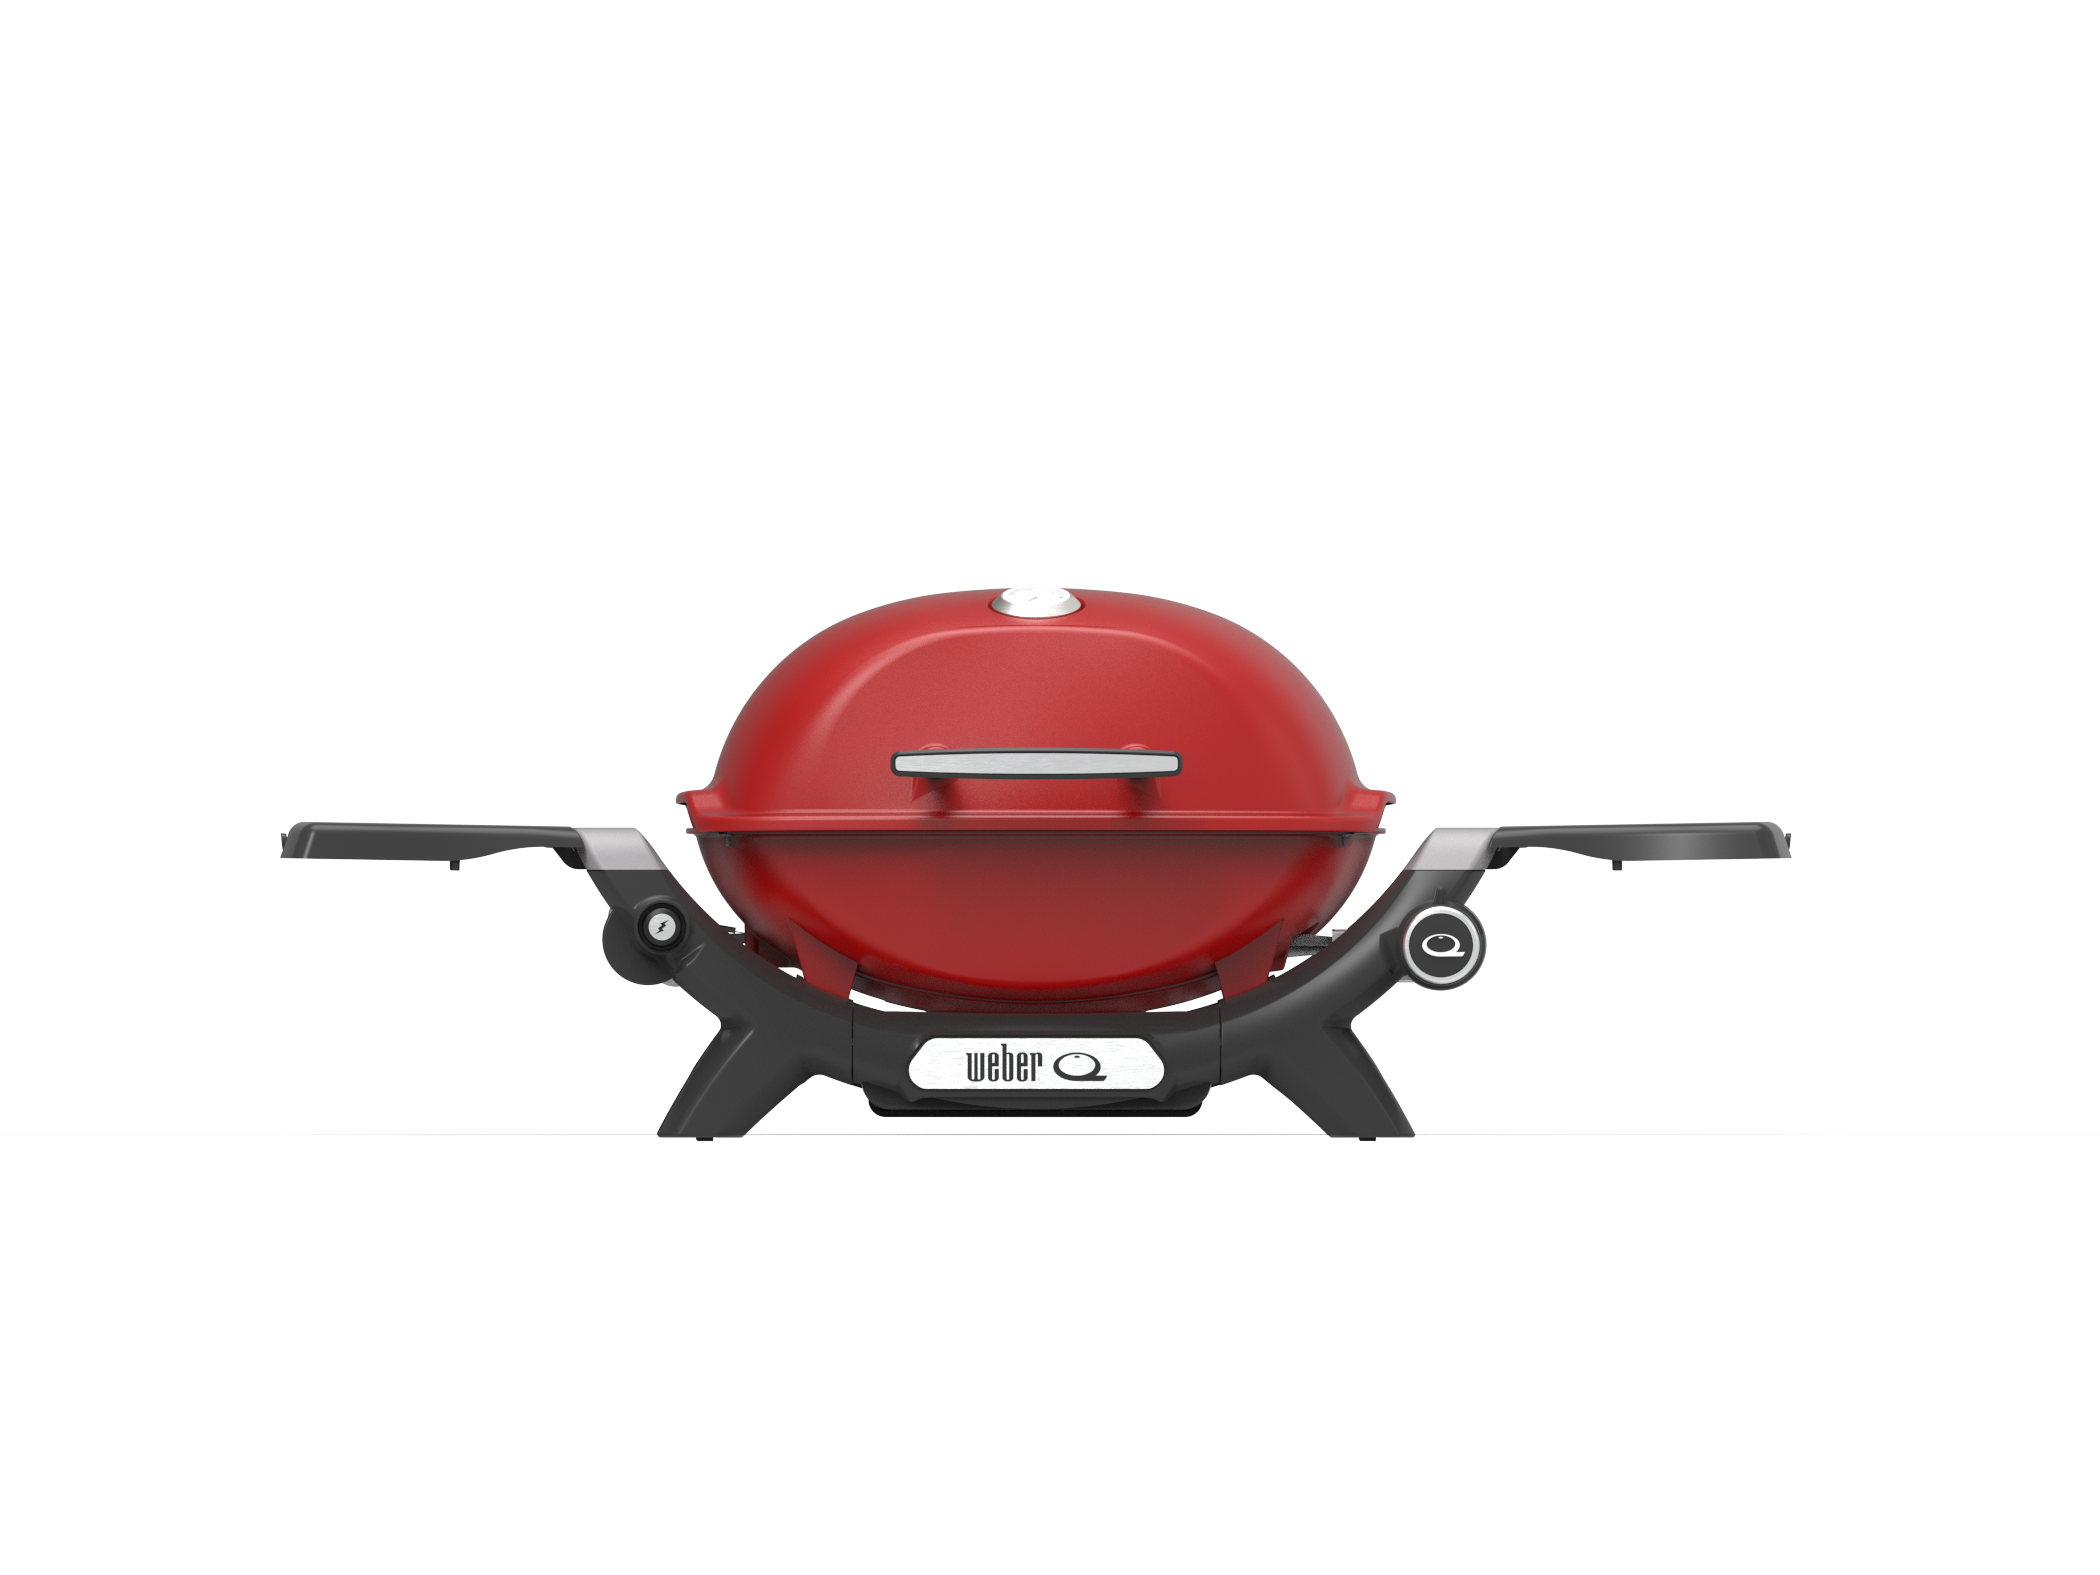 Weber Q 1200 N front view in red